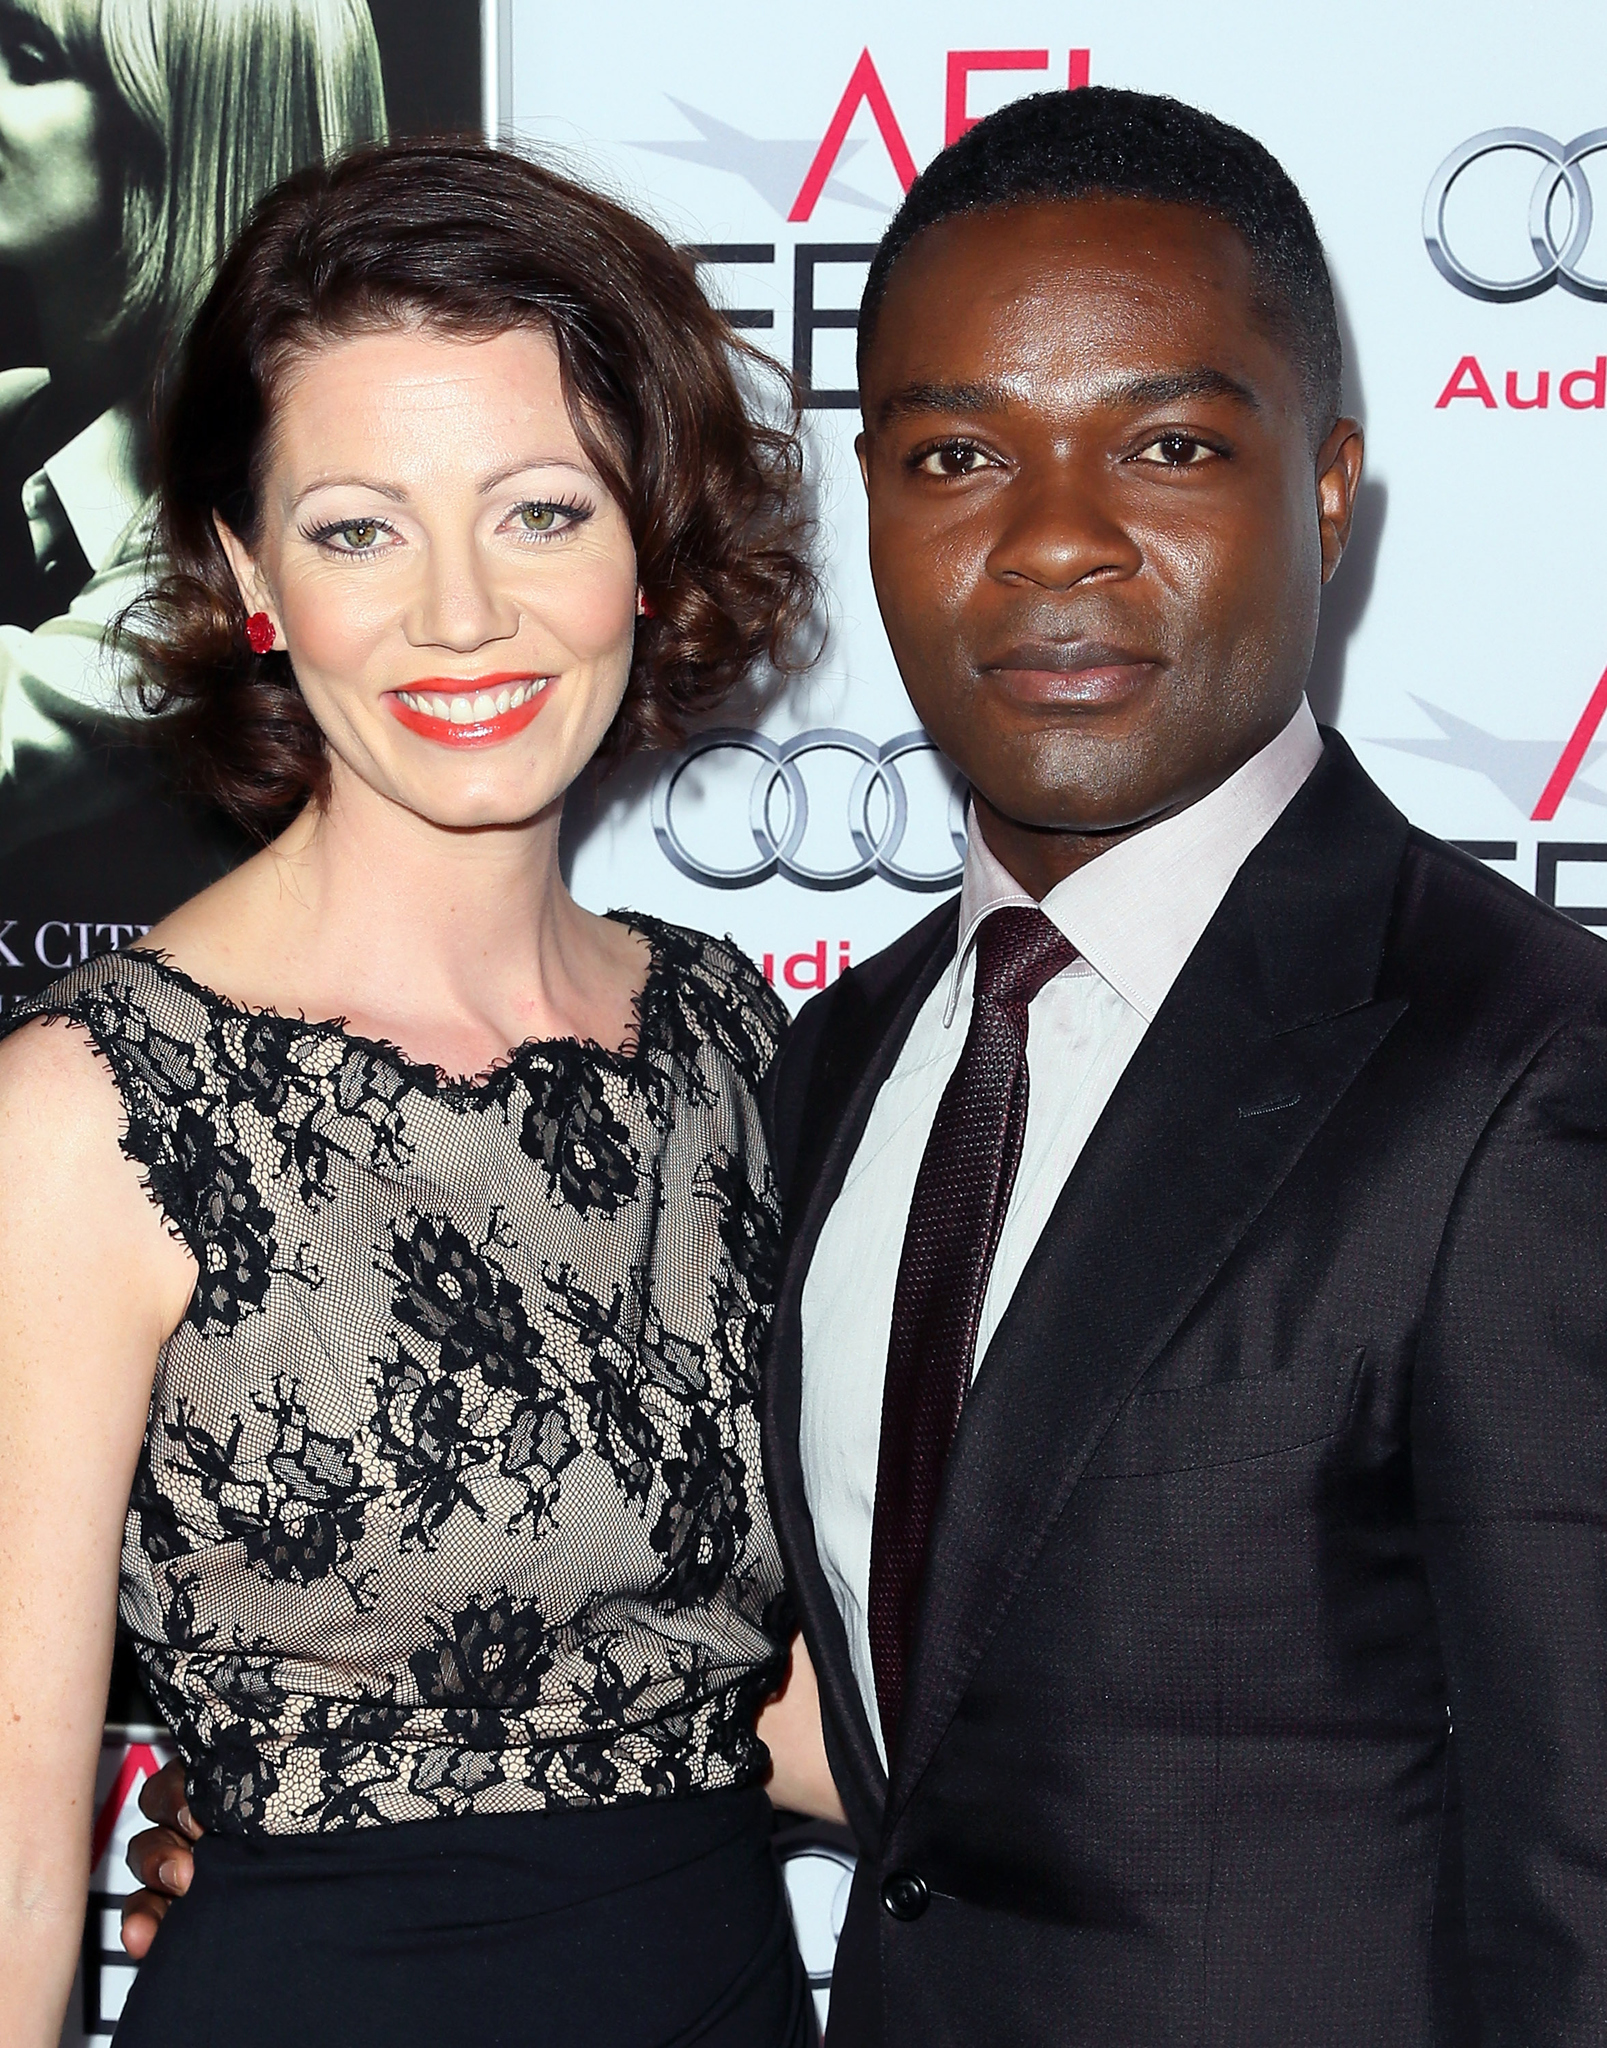 David Oyelowo and Jessica Oyelowo at event of A Most Violent Year (2014)